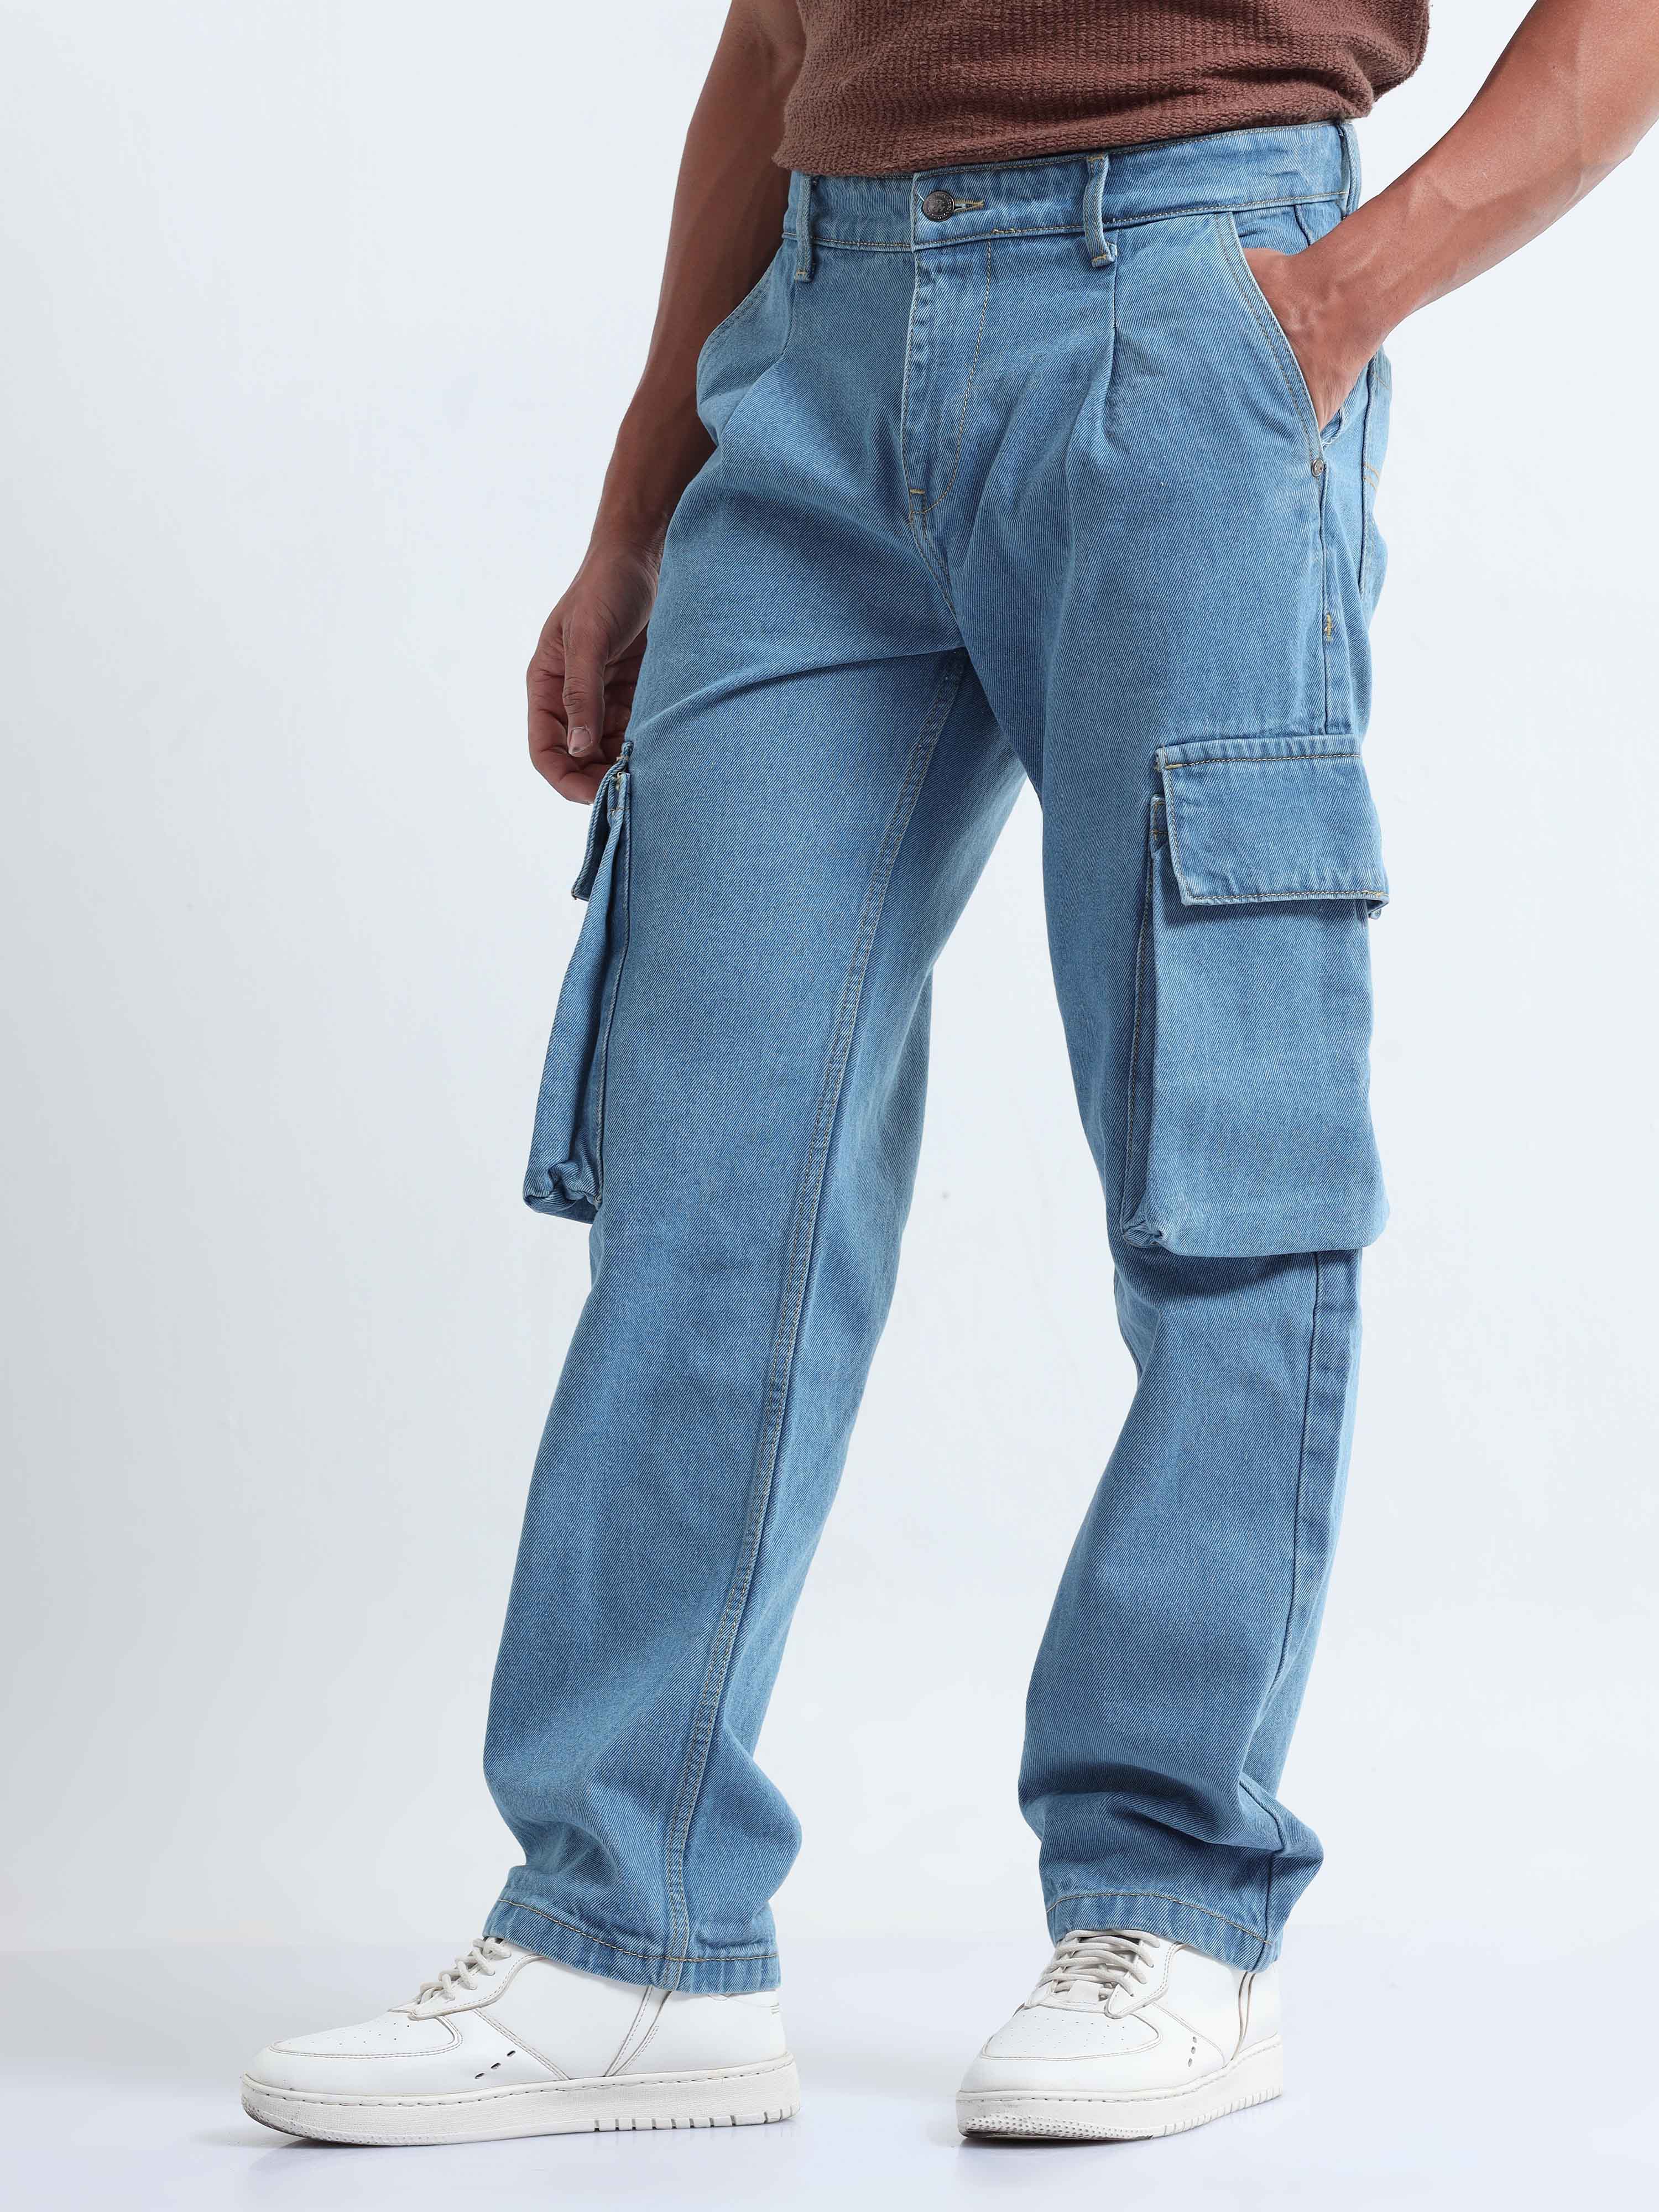 Black Baggy Cargo Pants by Levi's on Sale